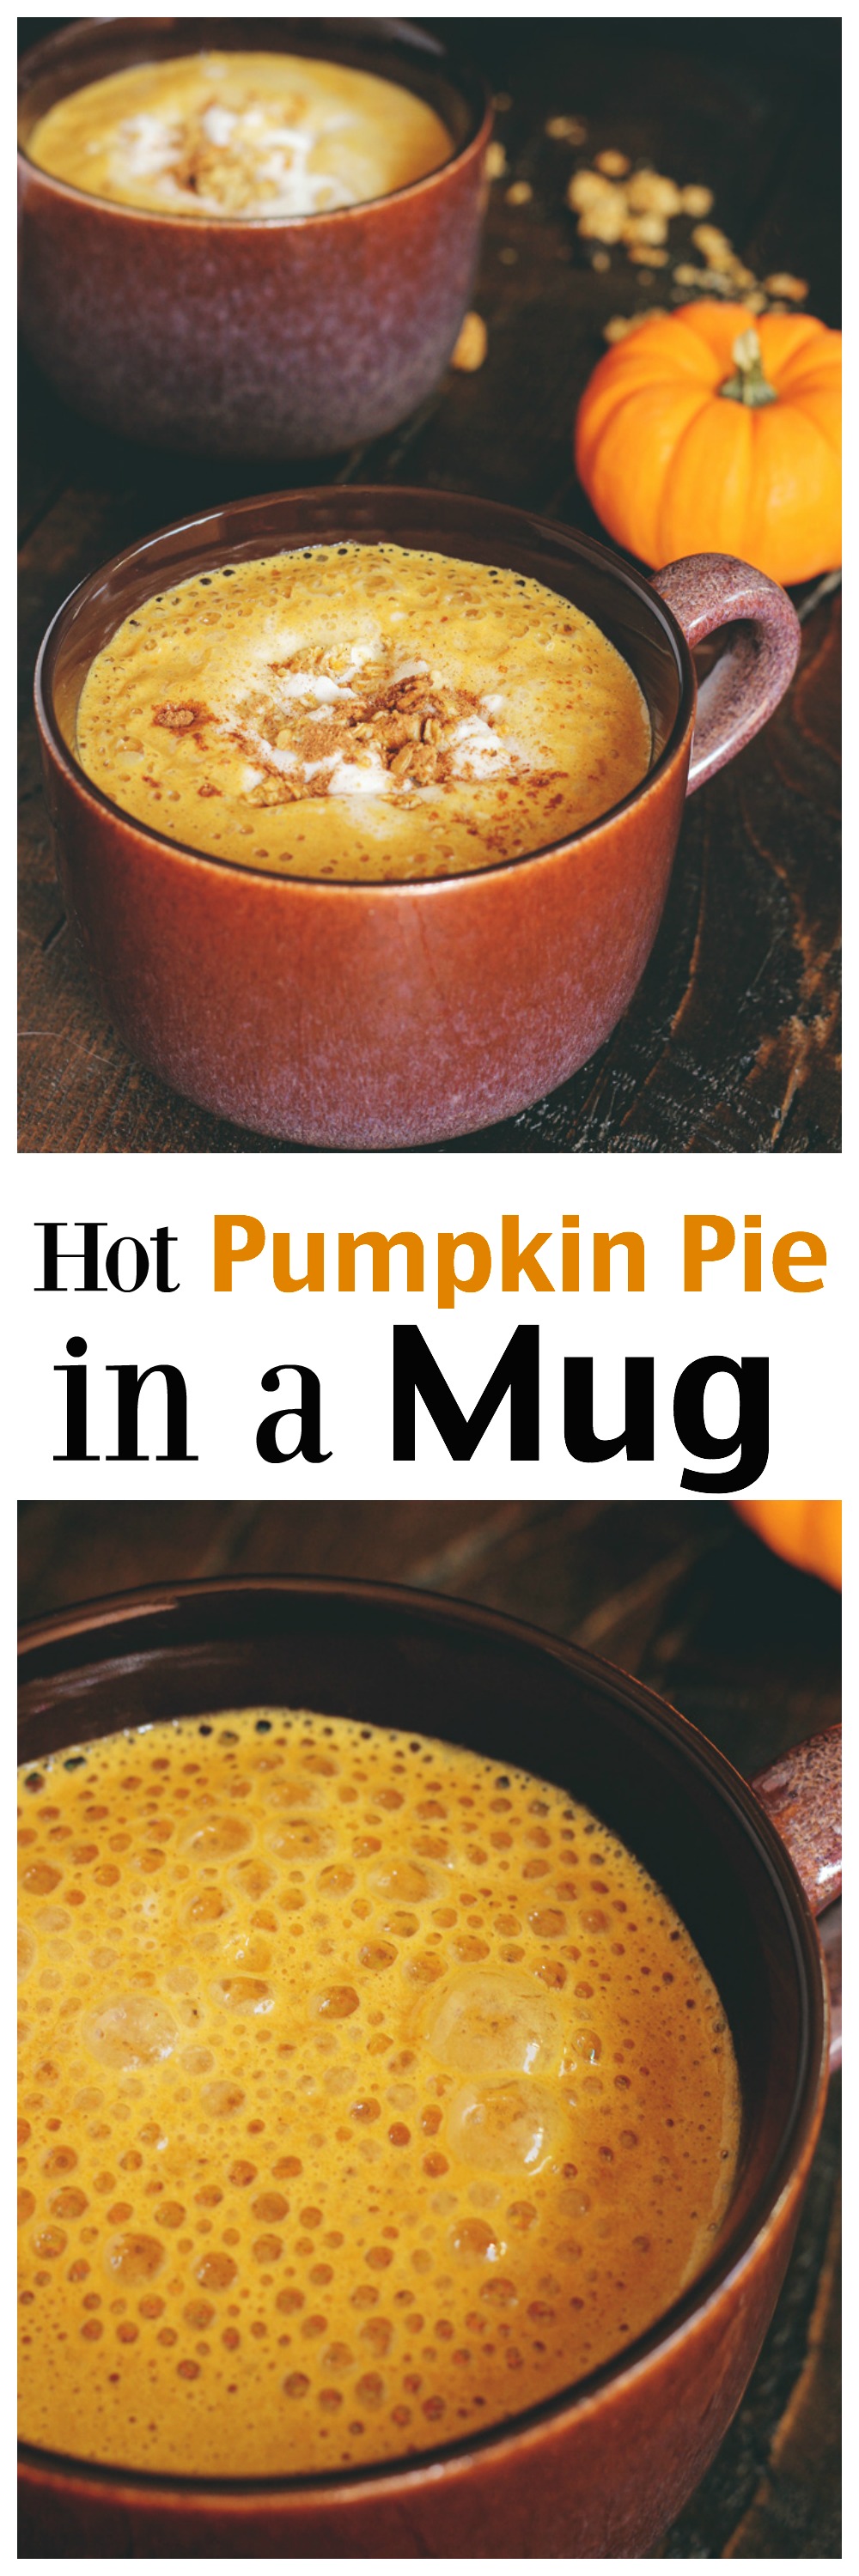 Hot Pumpkin Pie in a Mug - Cozy delicious pumpkin pie in your favorite mug. Topped with coconut whipped cream, it's sure to keep you warm and all pumpkin pie sweet this season. NeuroticMommy.com #vegan #pumpkinpie